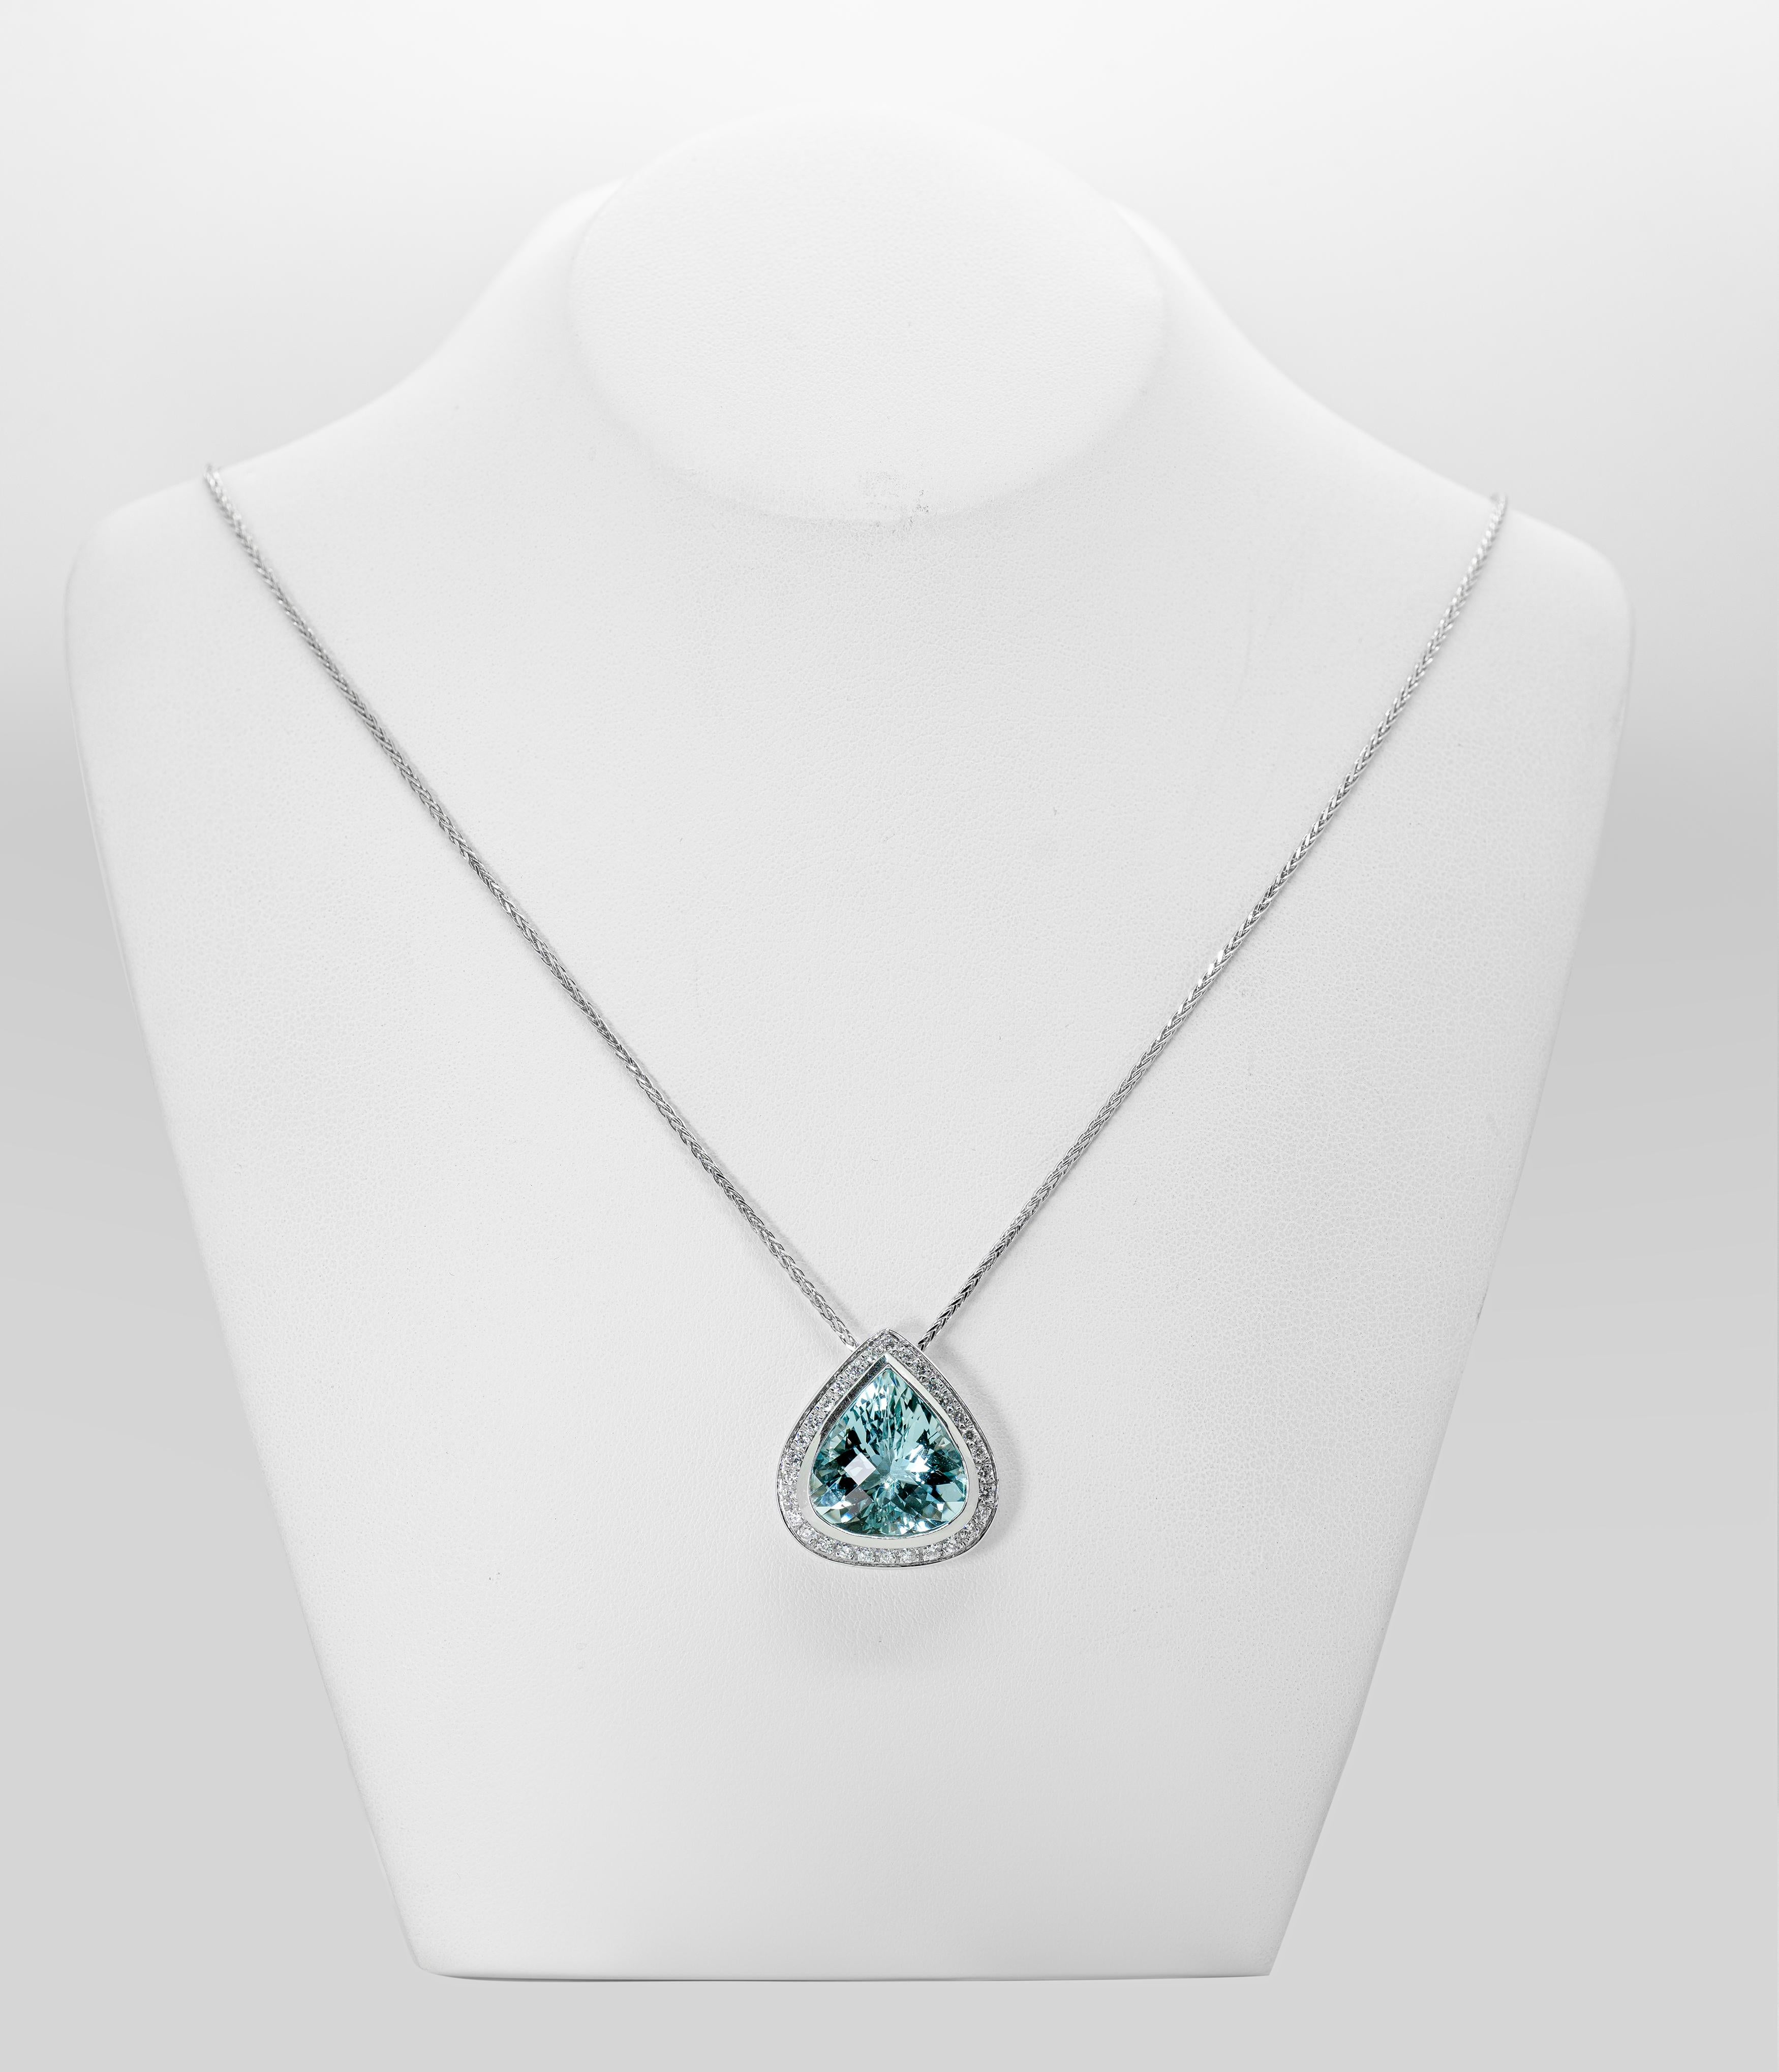 the exquisite beauty of solid gold pear cut aquamarine pendant